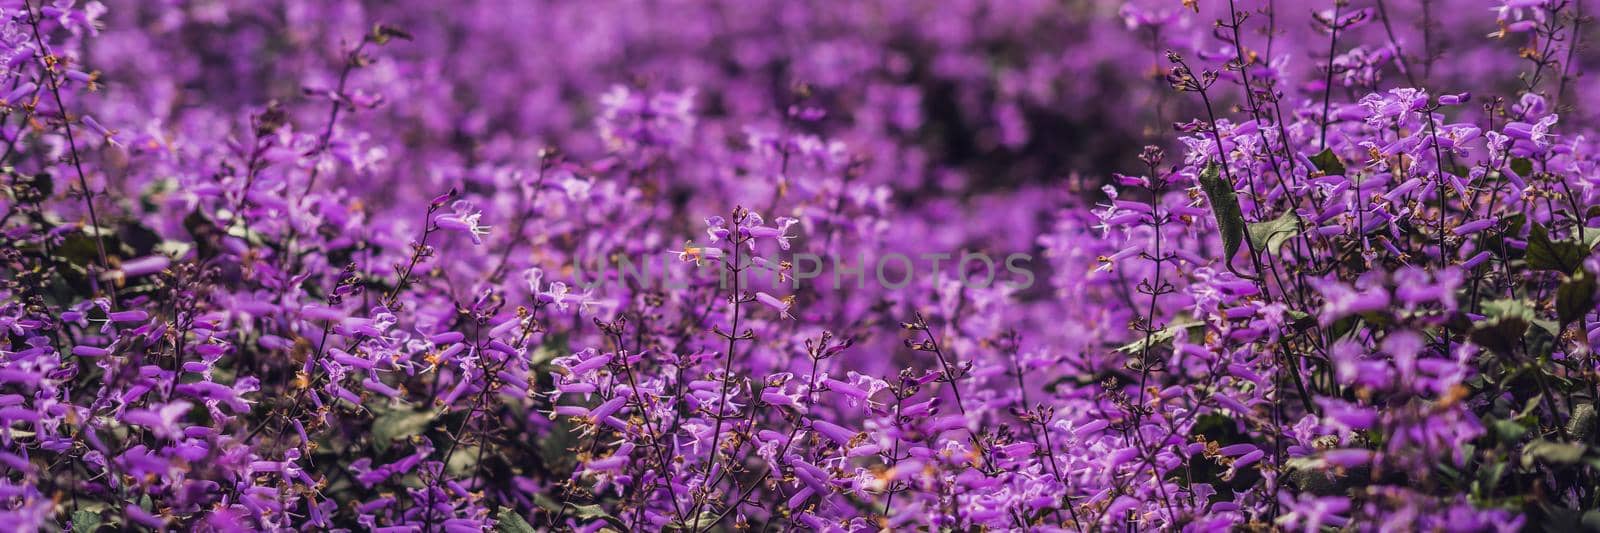 Lavender flowers at sunlight in a soft focus, pastel colors and blur background. BANNER long format